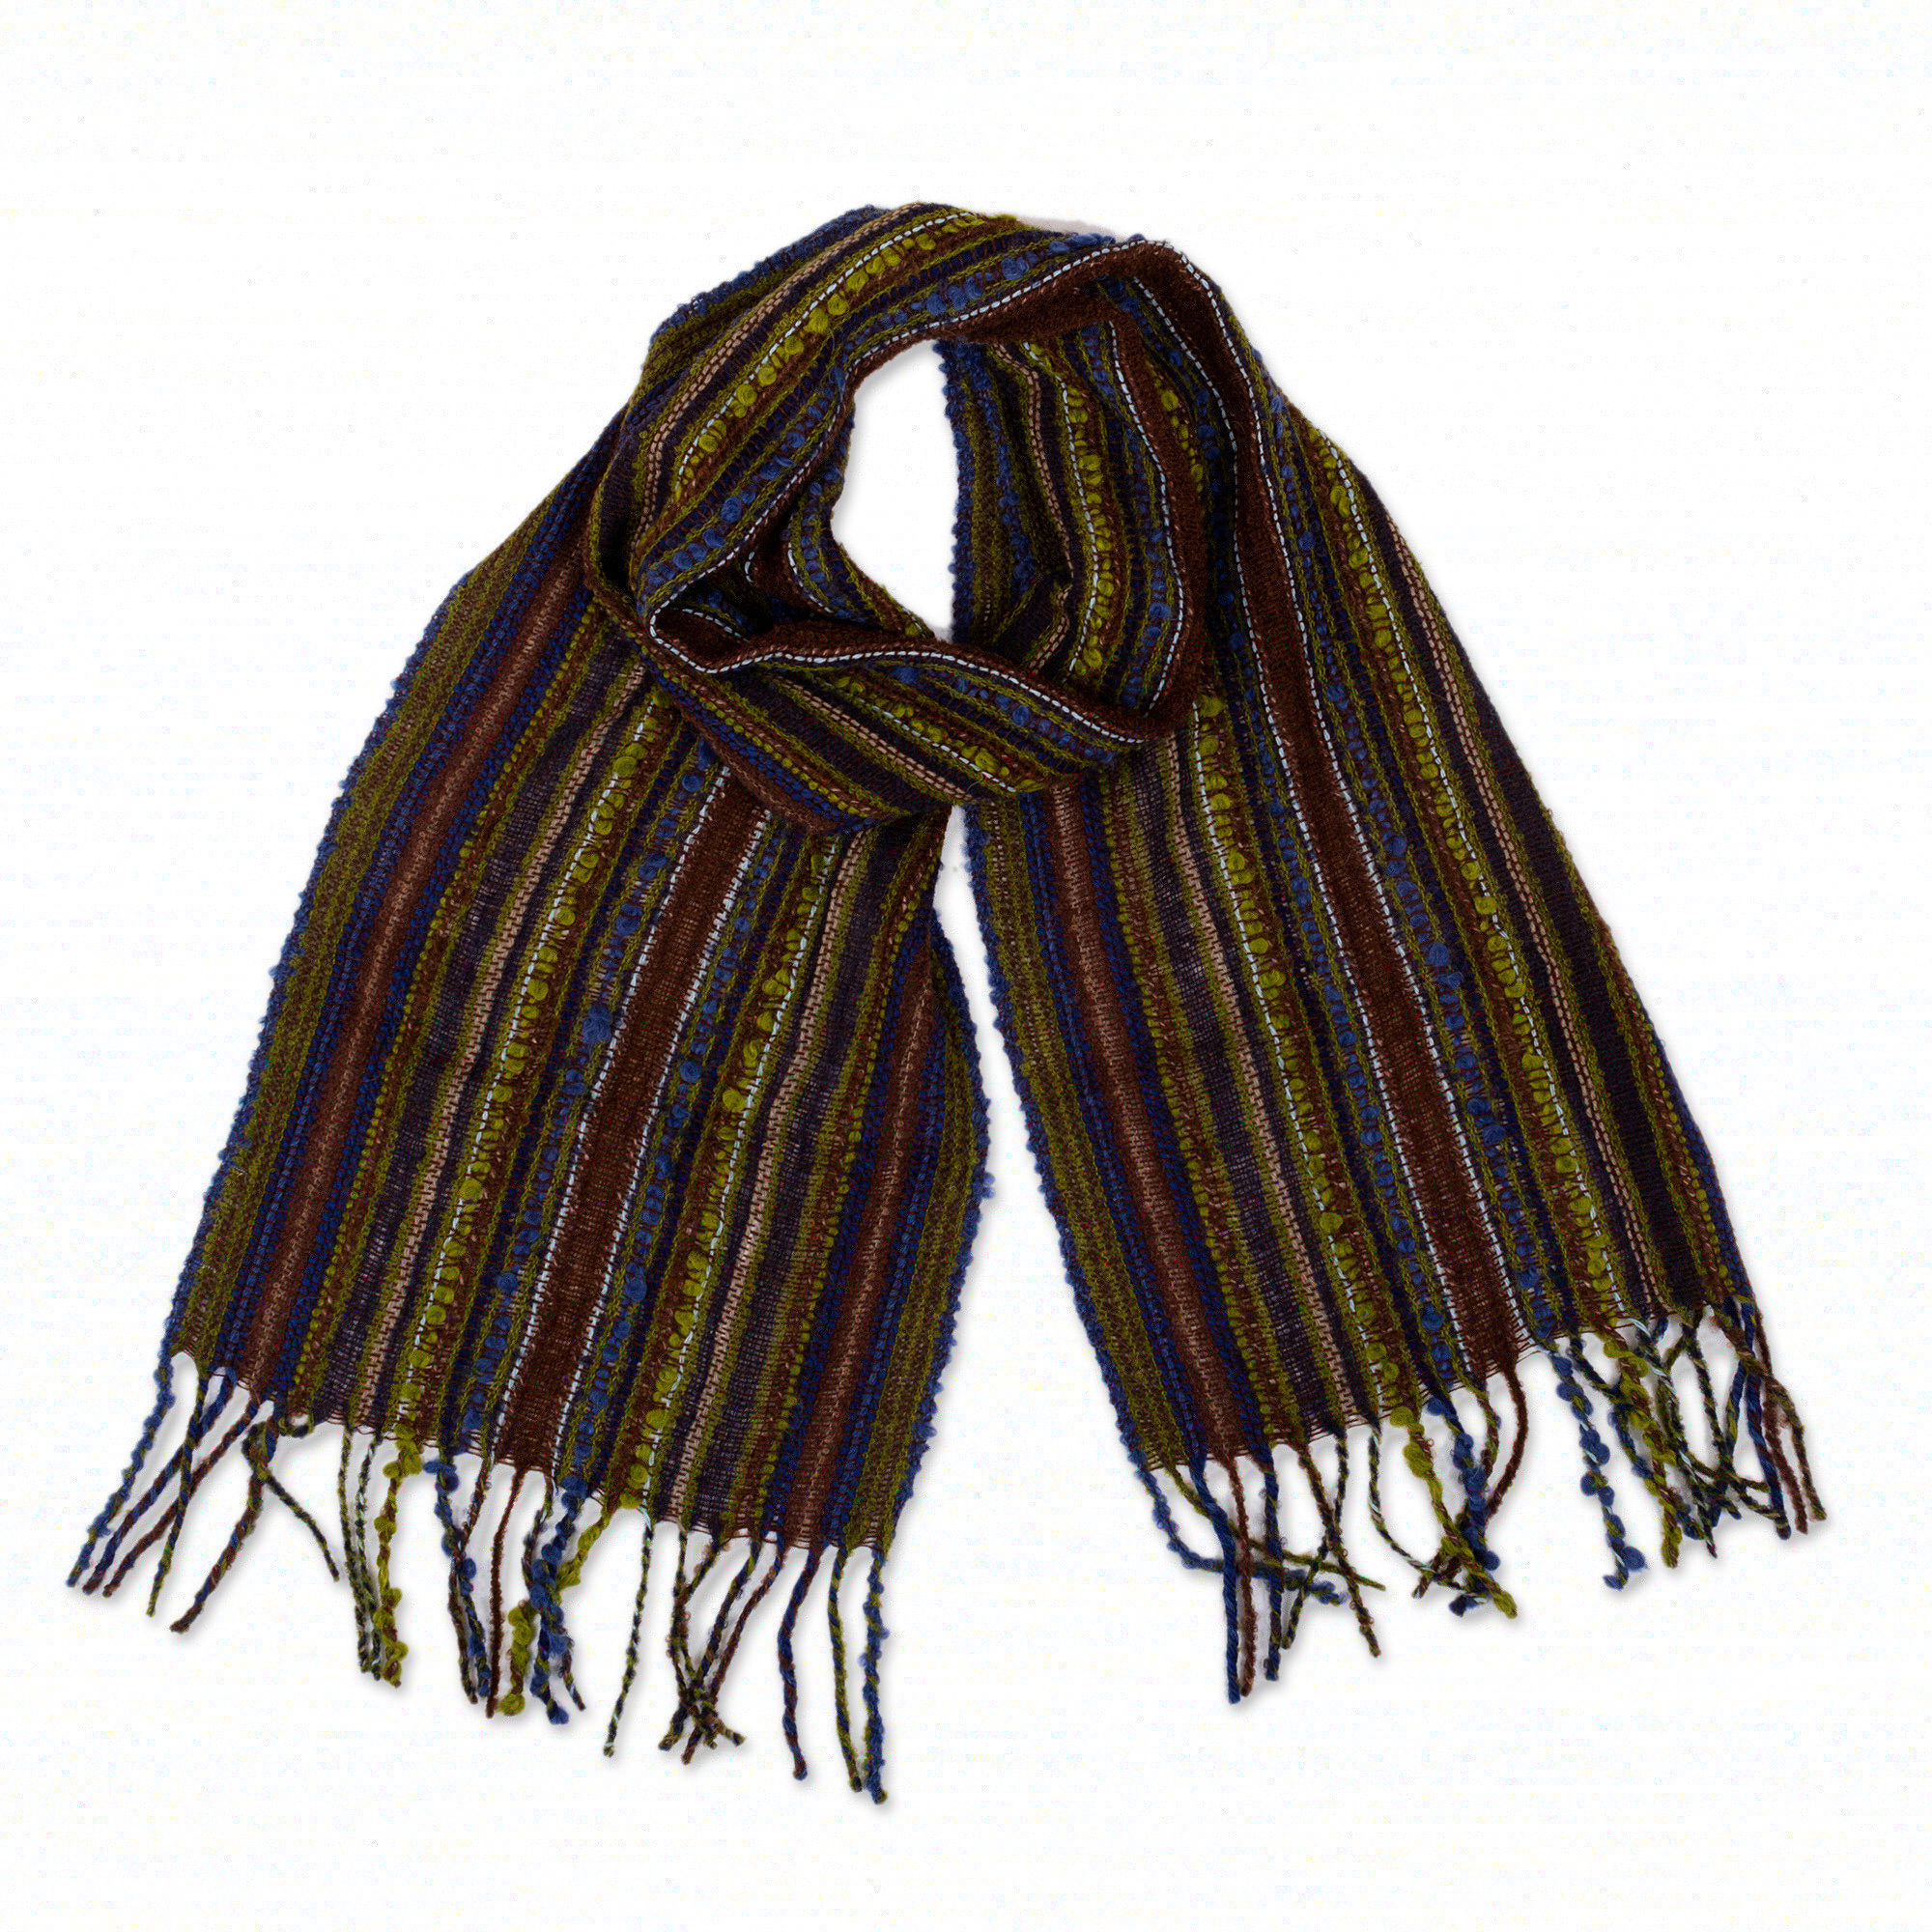 Handwoven Striped Green and Brown Baby Alpaca Blend Scarf